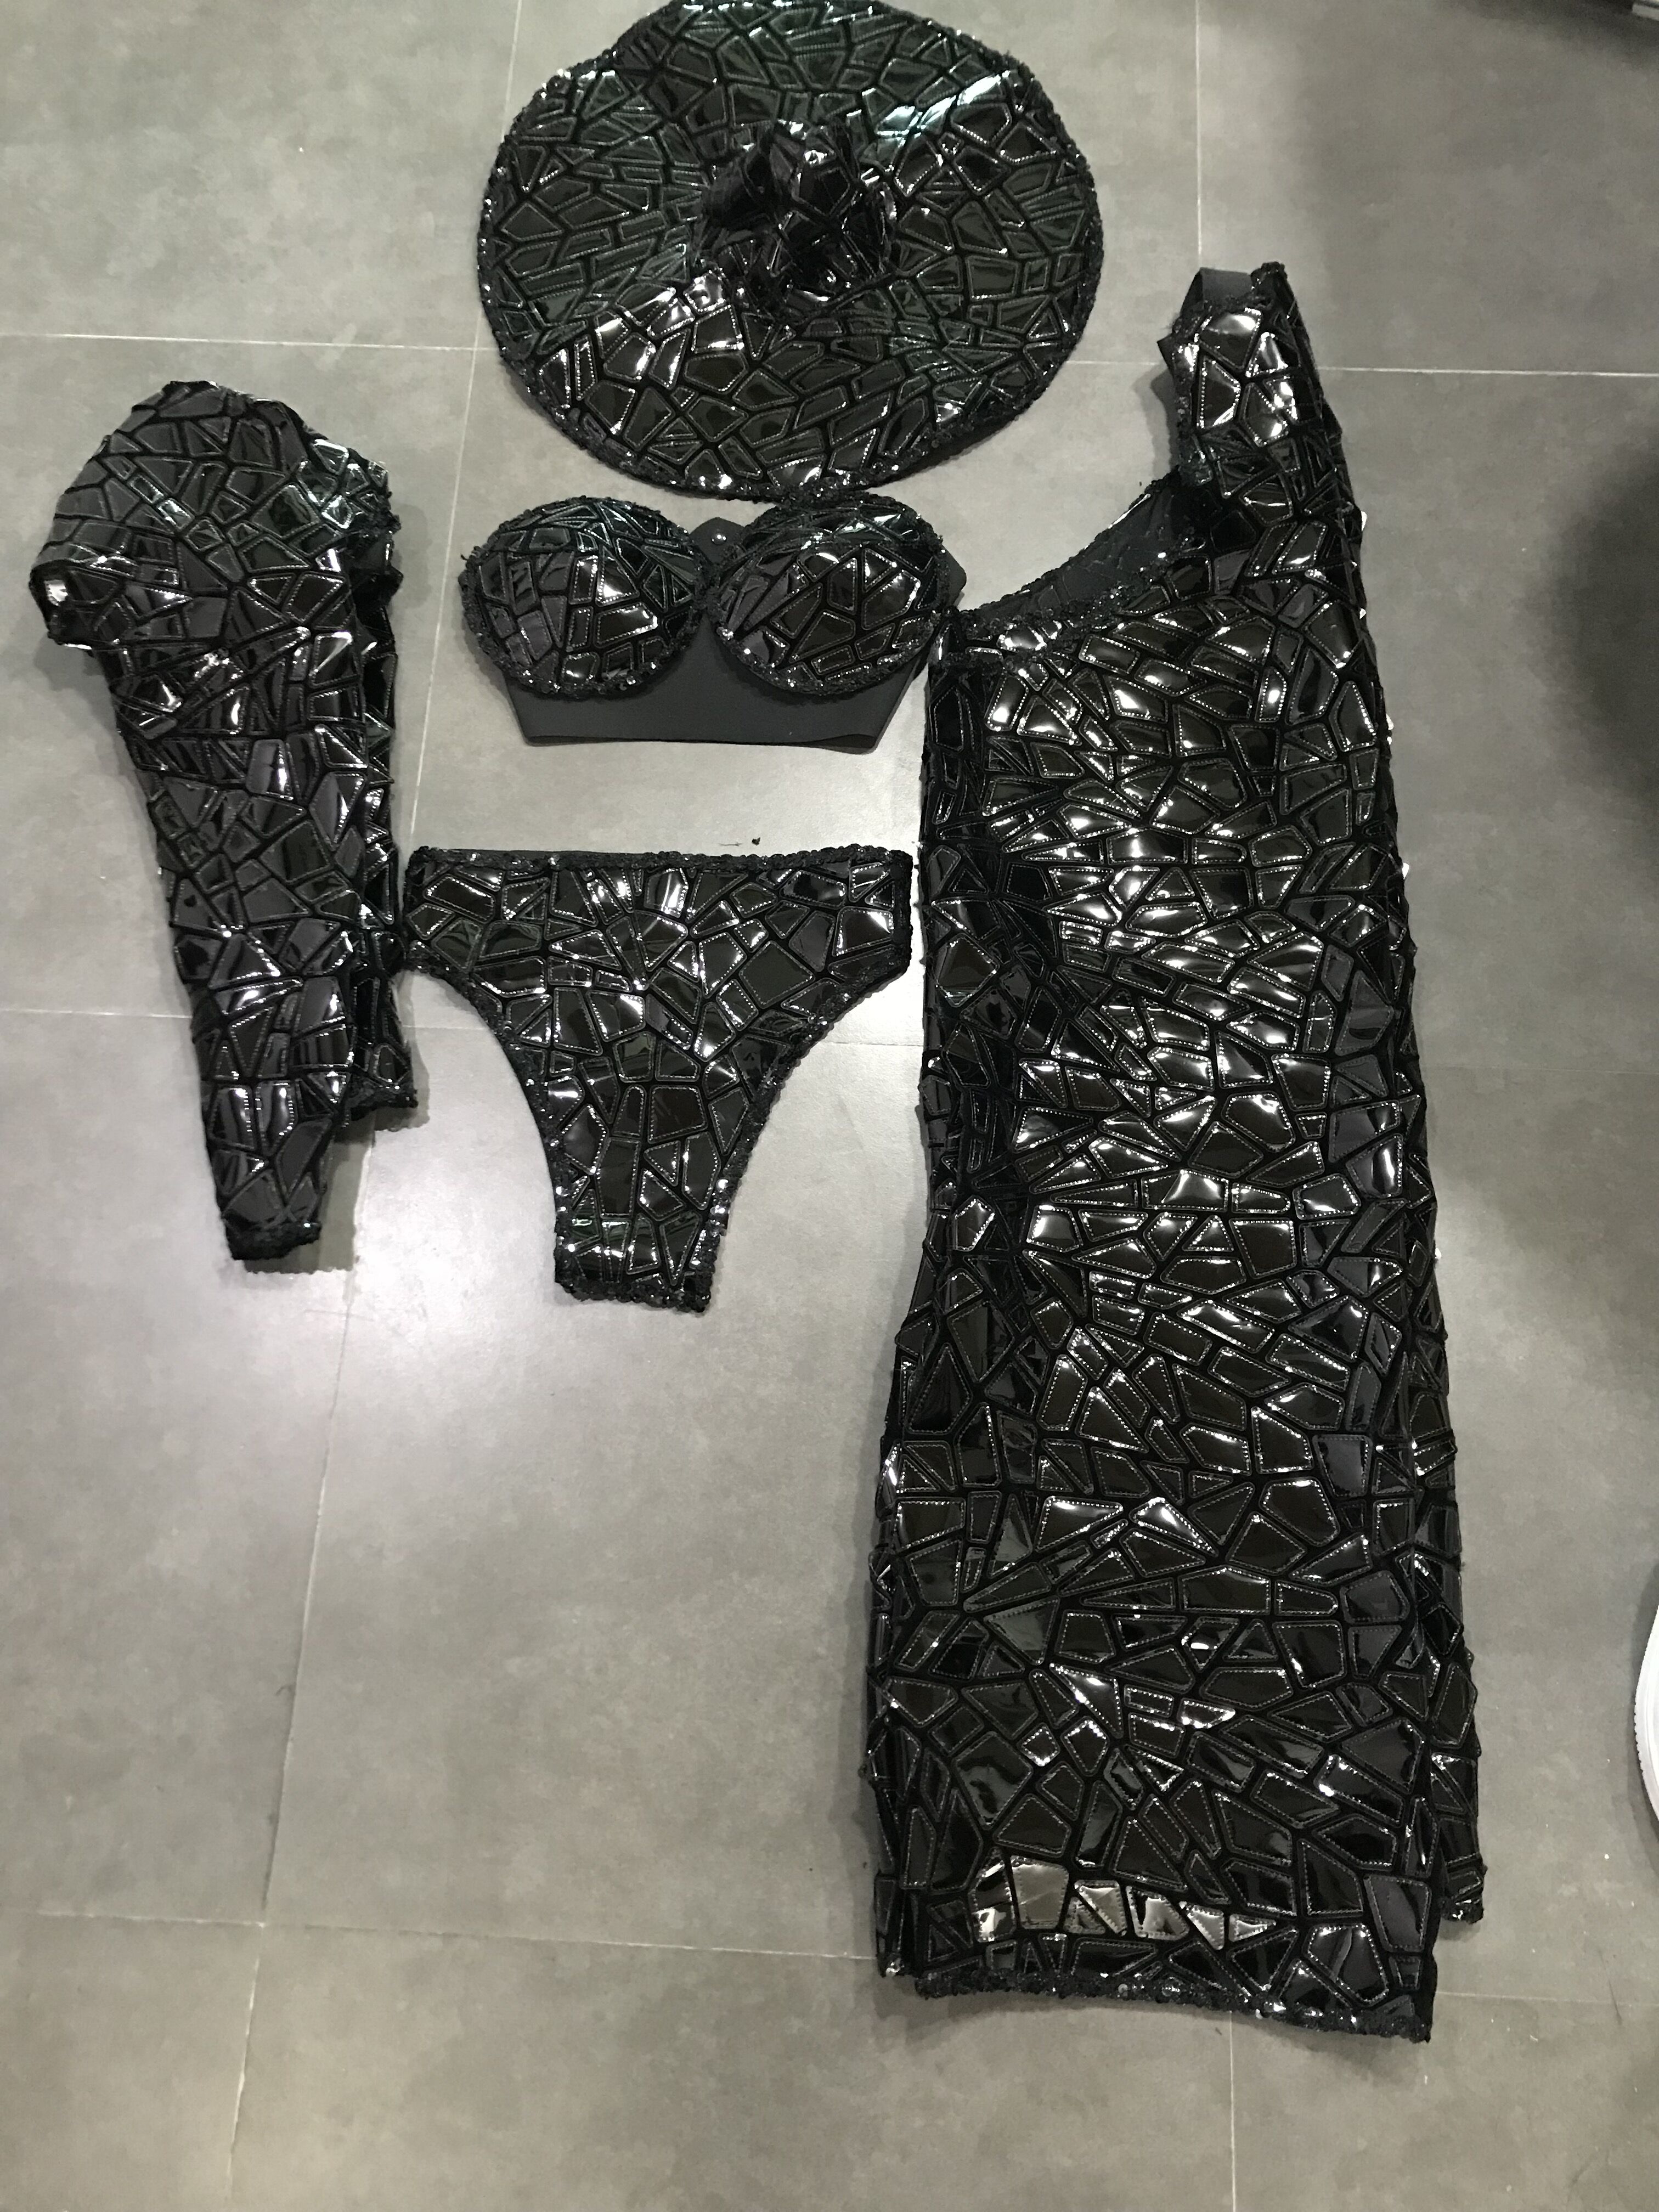 Female Singer Costume Nightclub Gogo Dancer Mirror Bra Tops Pants Dj Ds Punk Performance Wear Party Outfit Shiny Stage Costumes